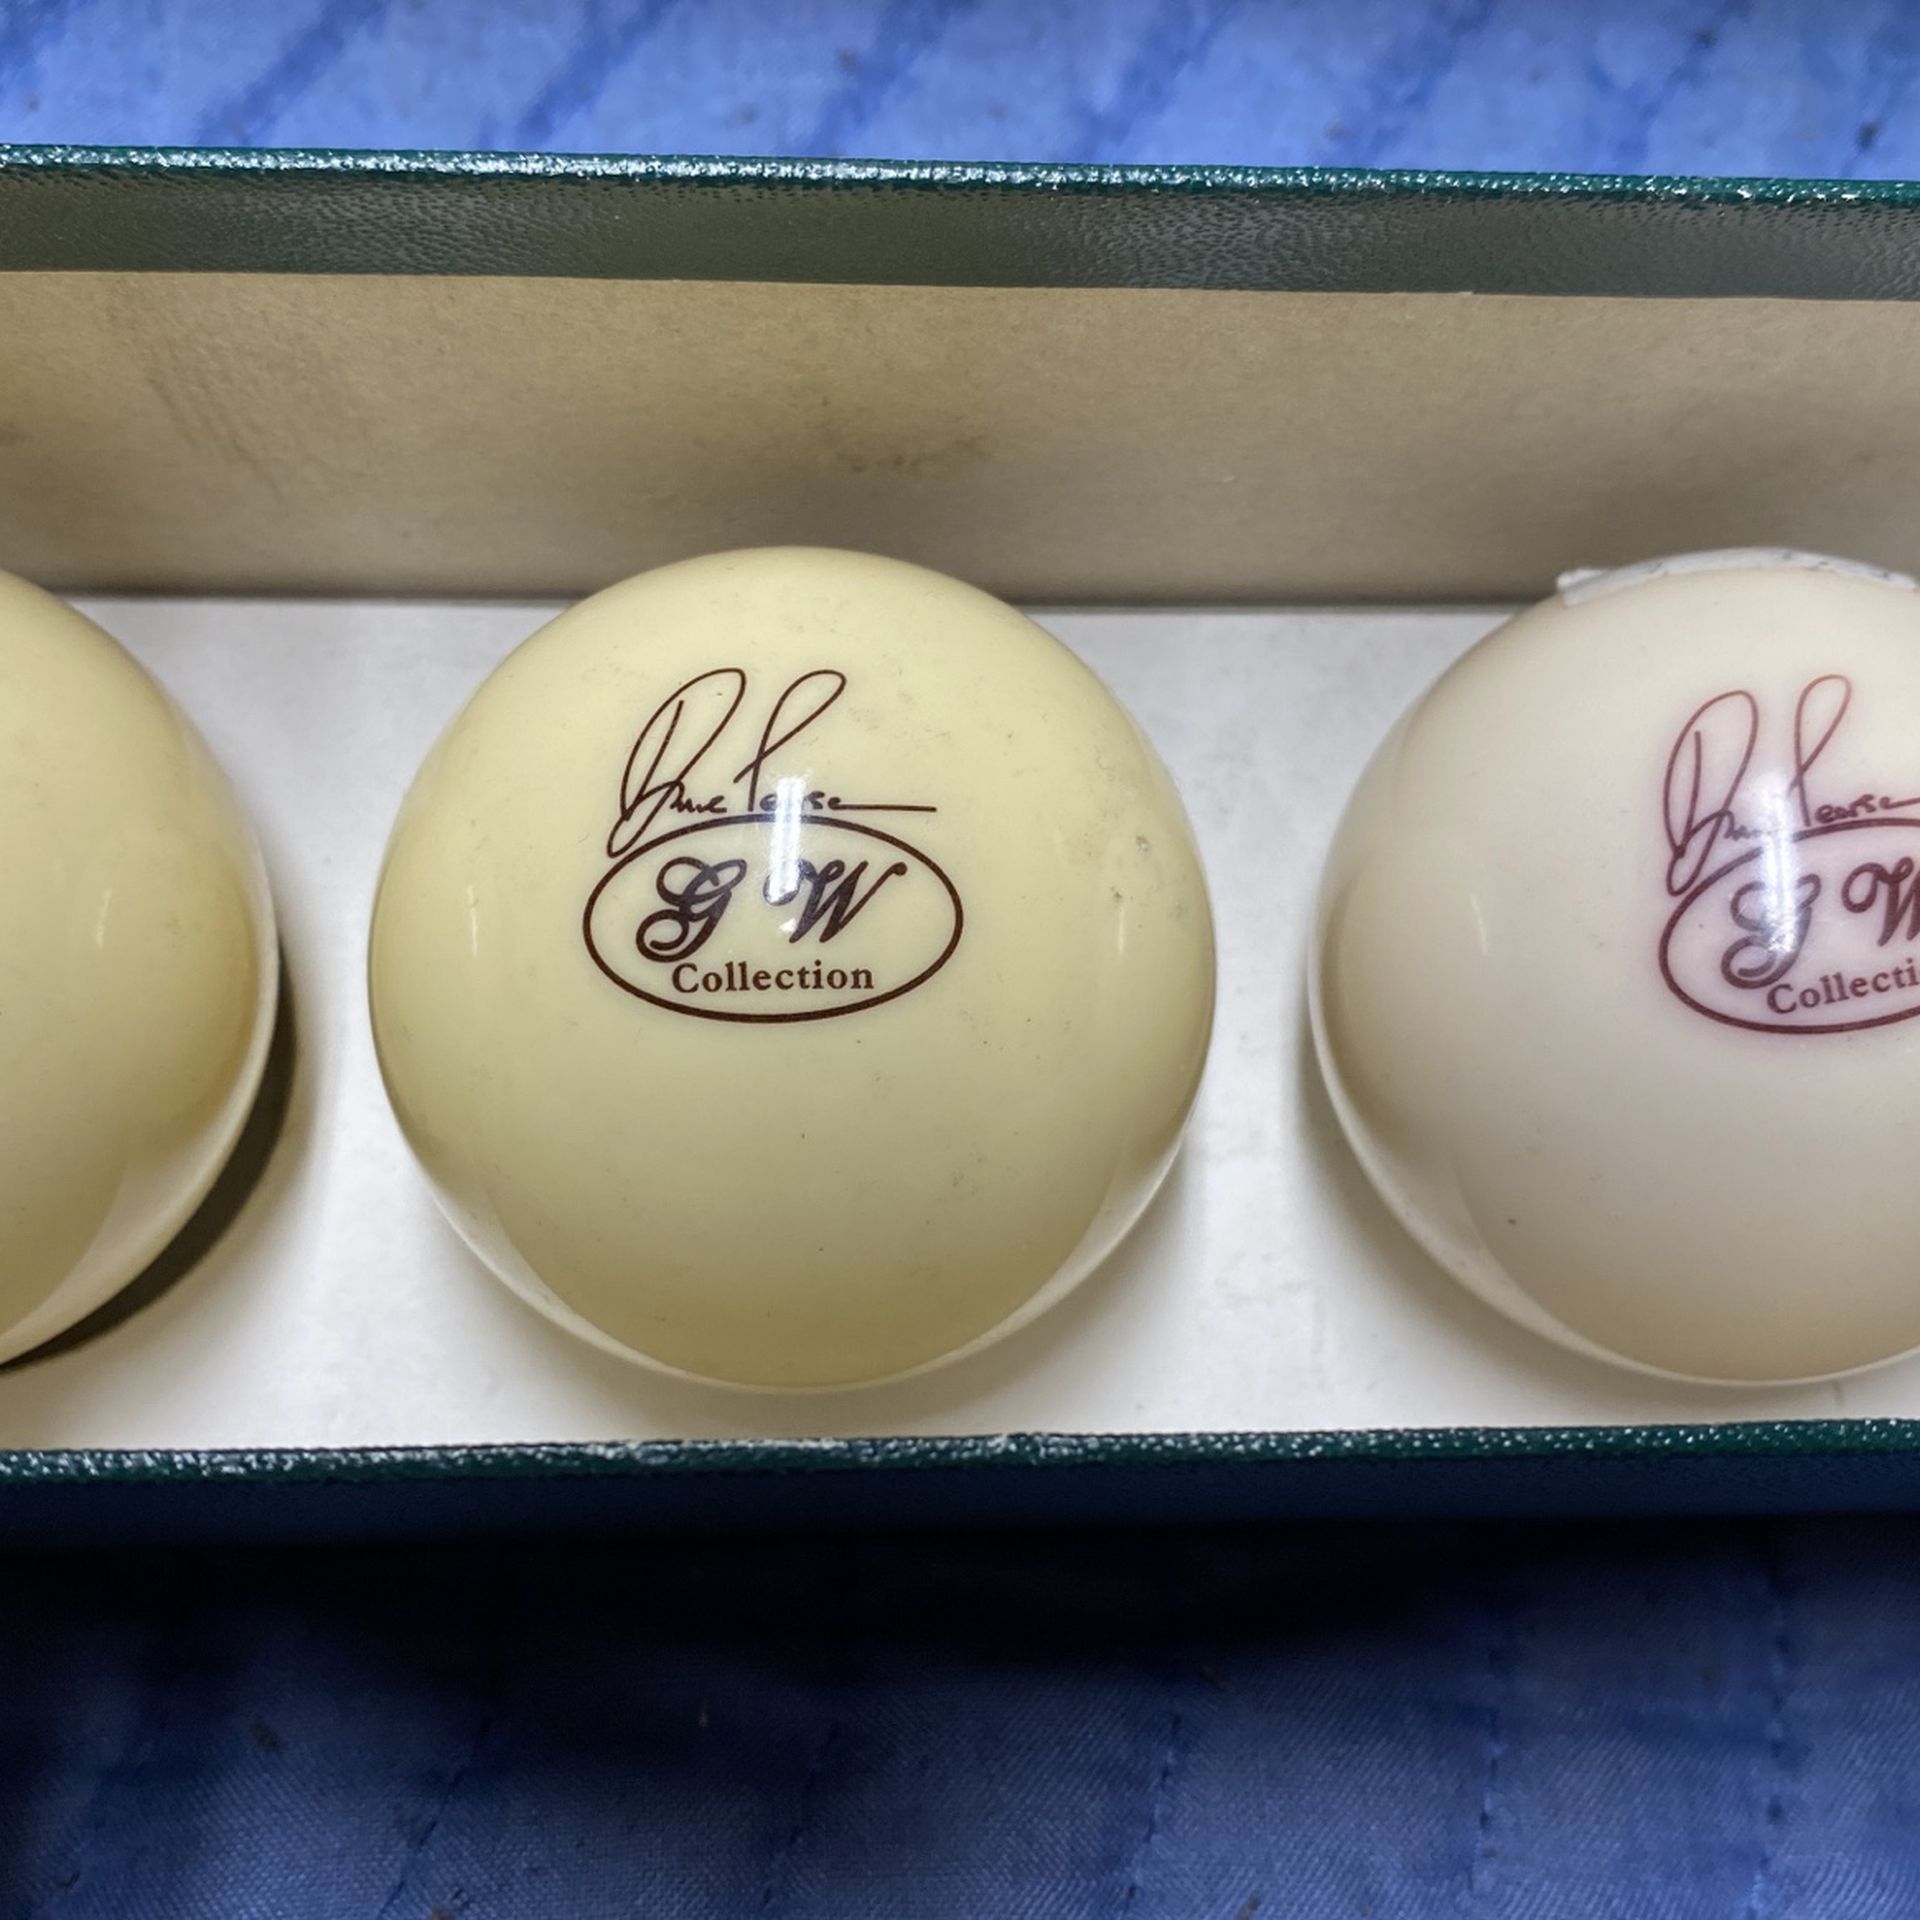 Lot Of 3 Dave Pears G W collection $23 White Ball Pool Table Billiards 